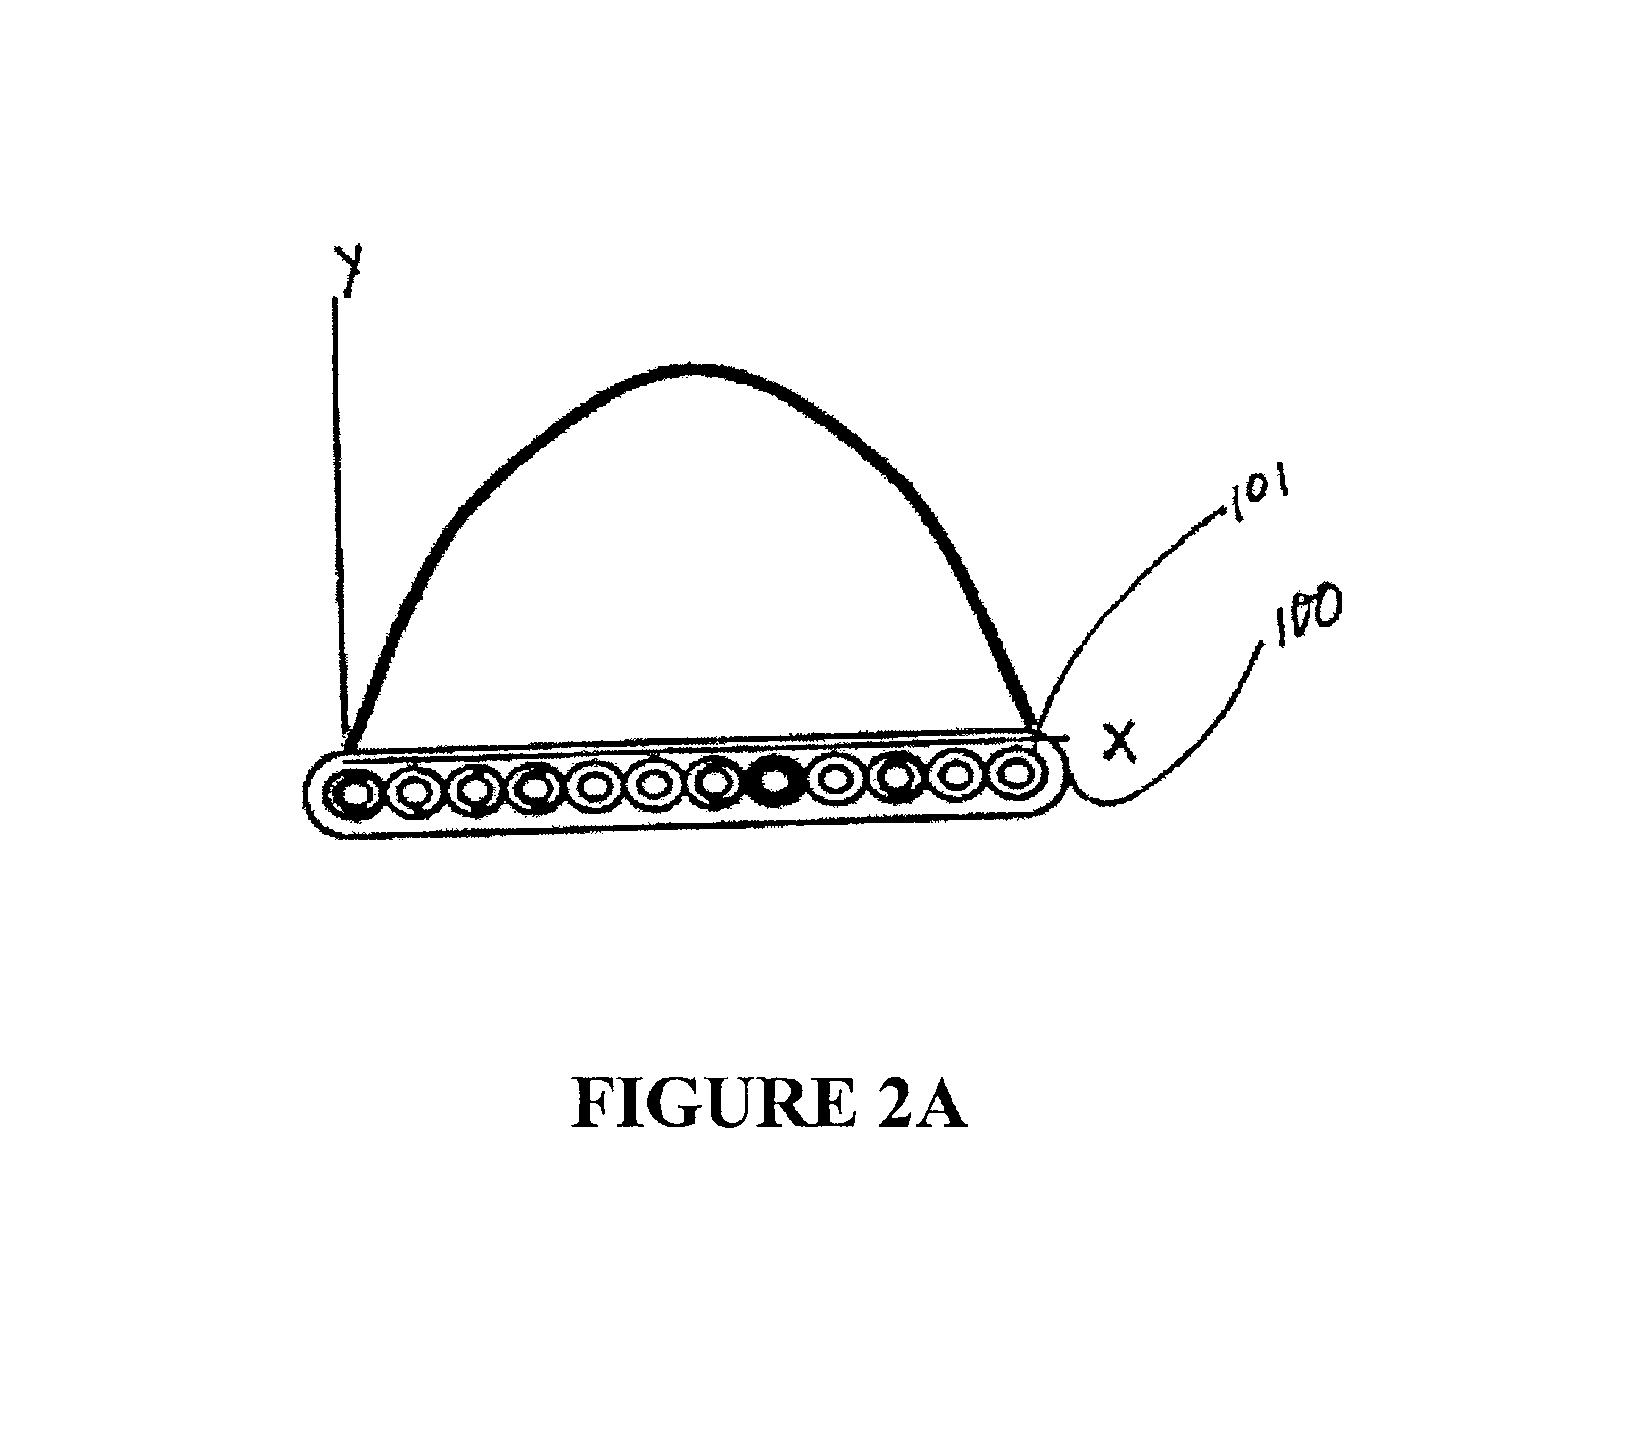 Functionally strained optical fibers